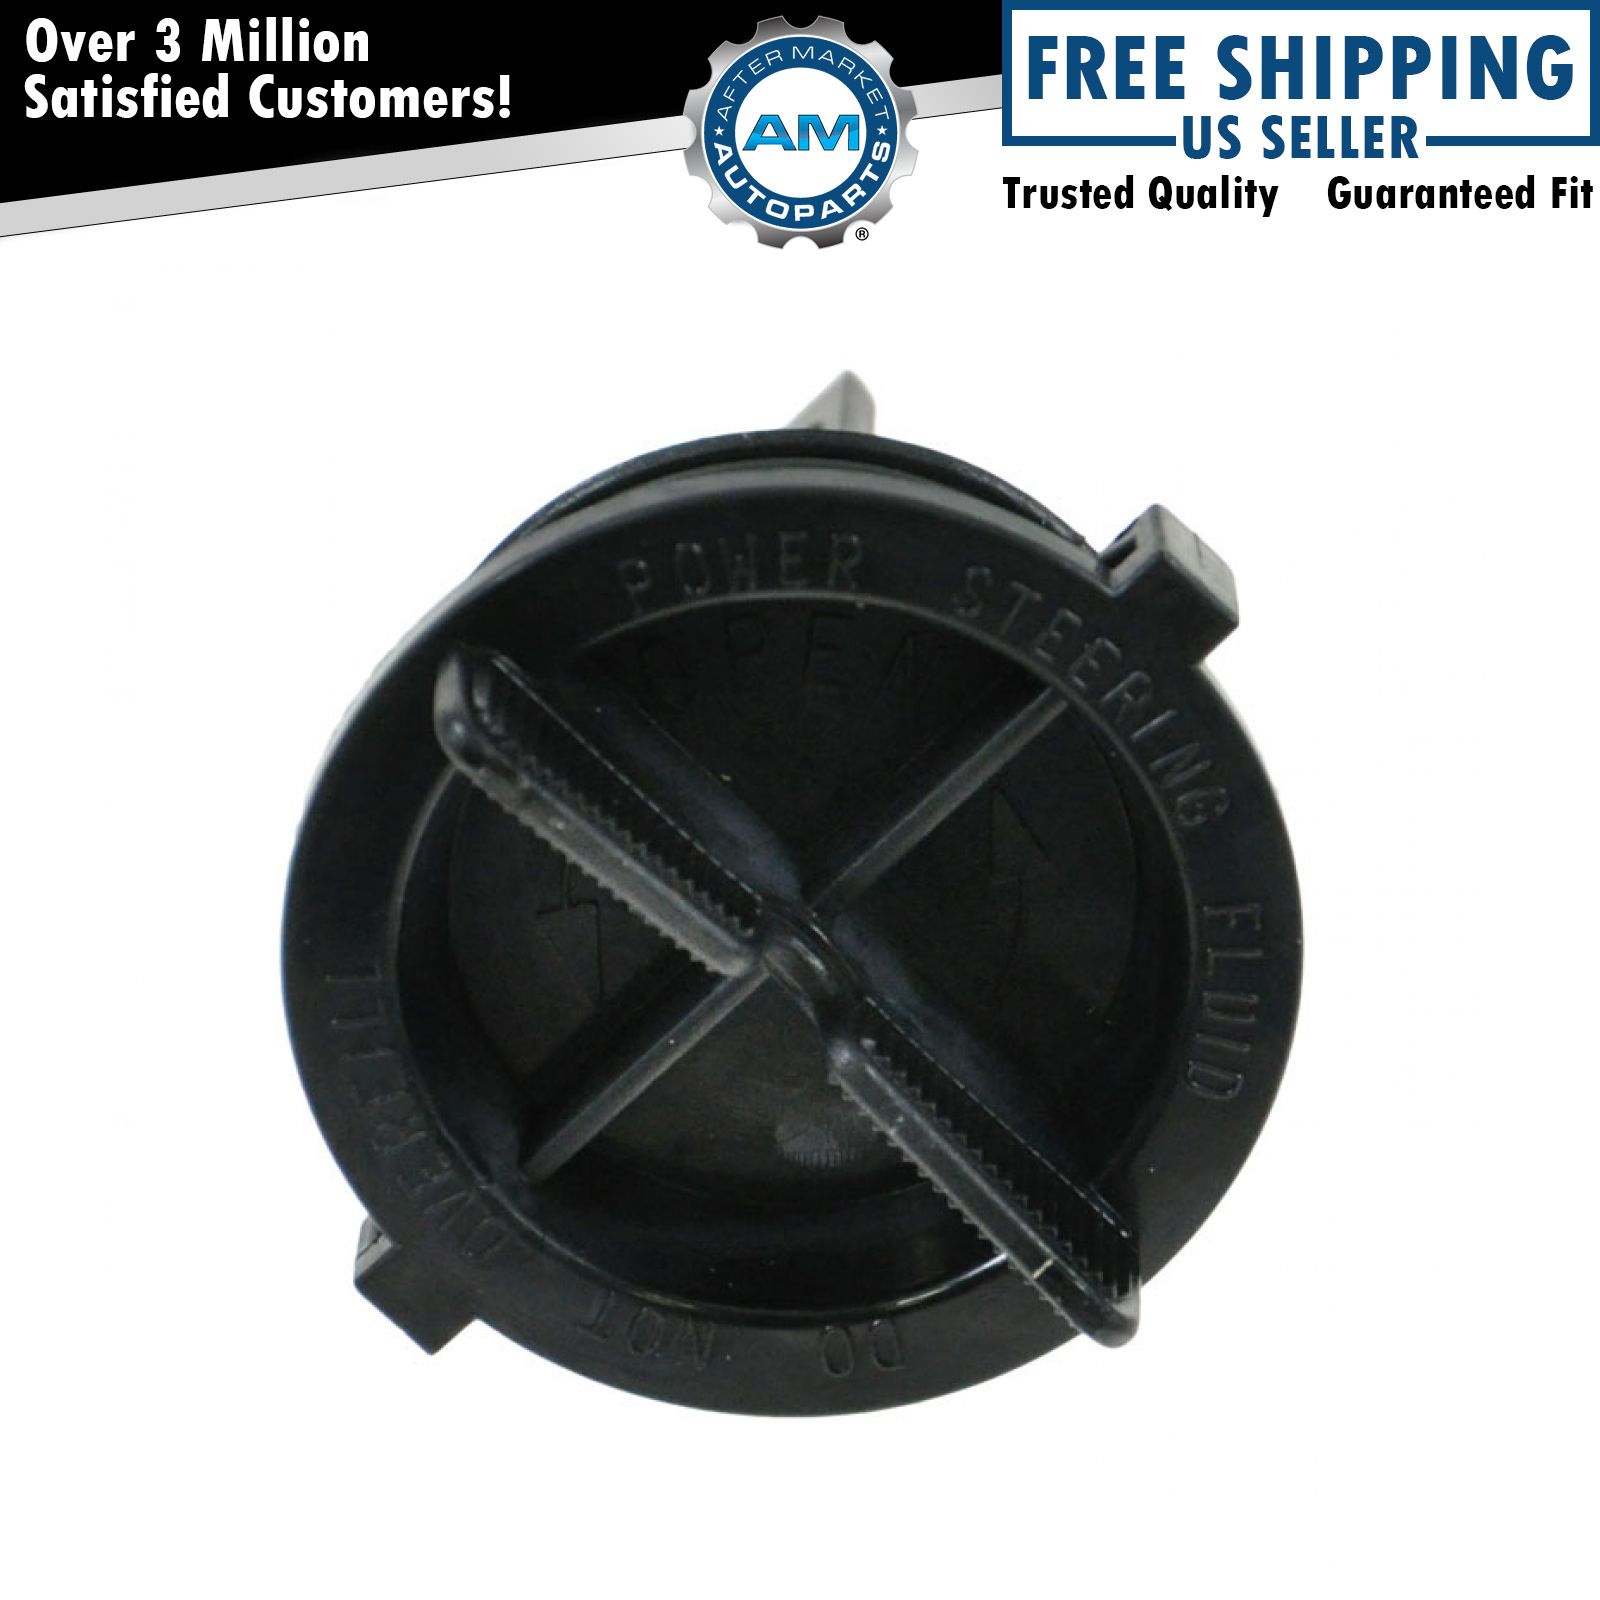 Power Steering Pump Cap for Ford Bronco LTD F150 F250 F350 Pickup Truck Mustang